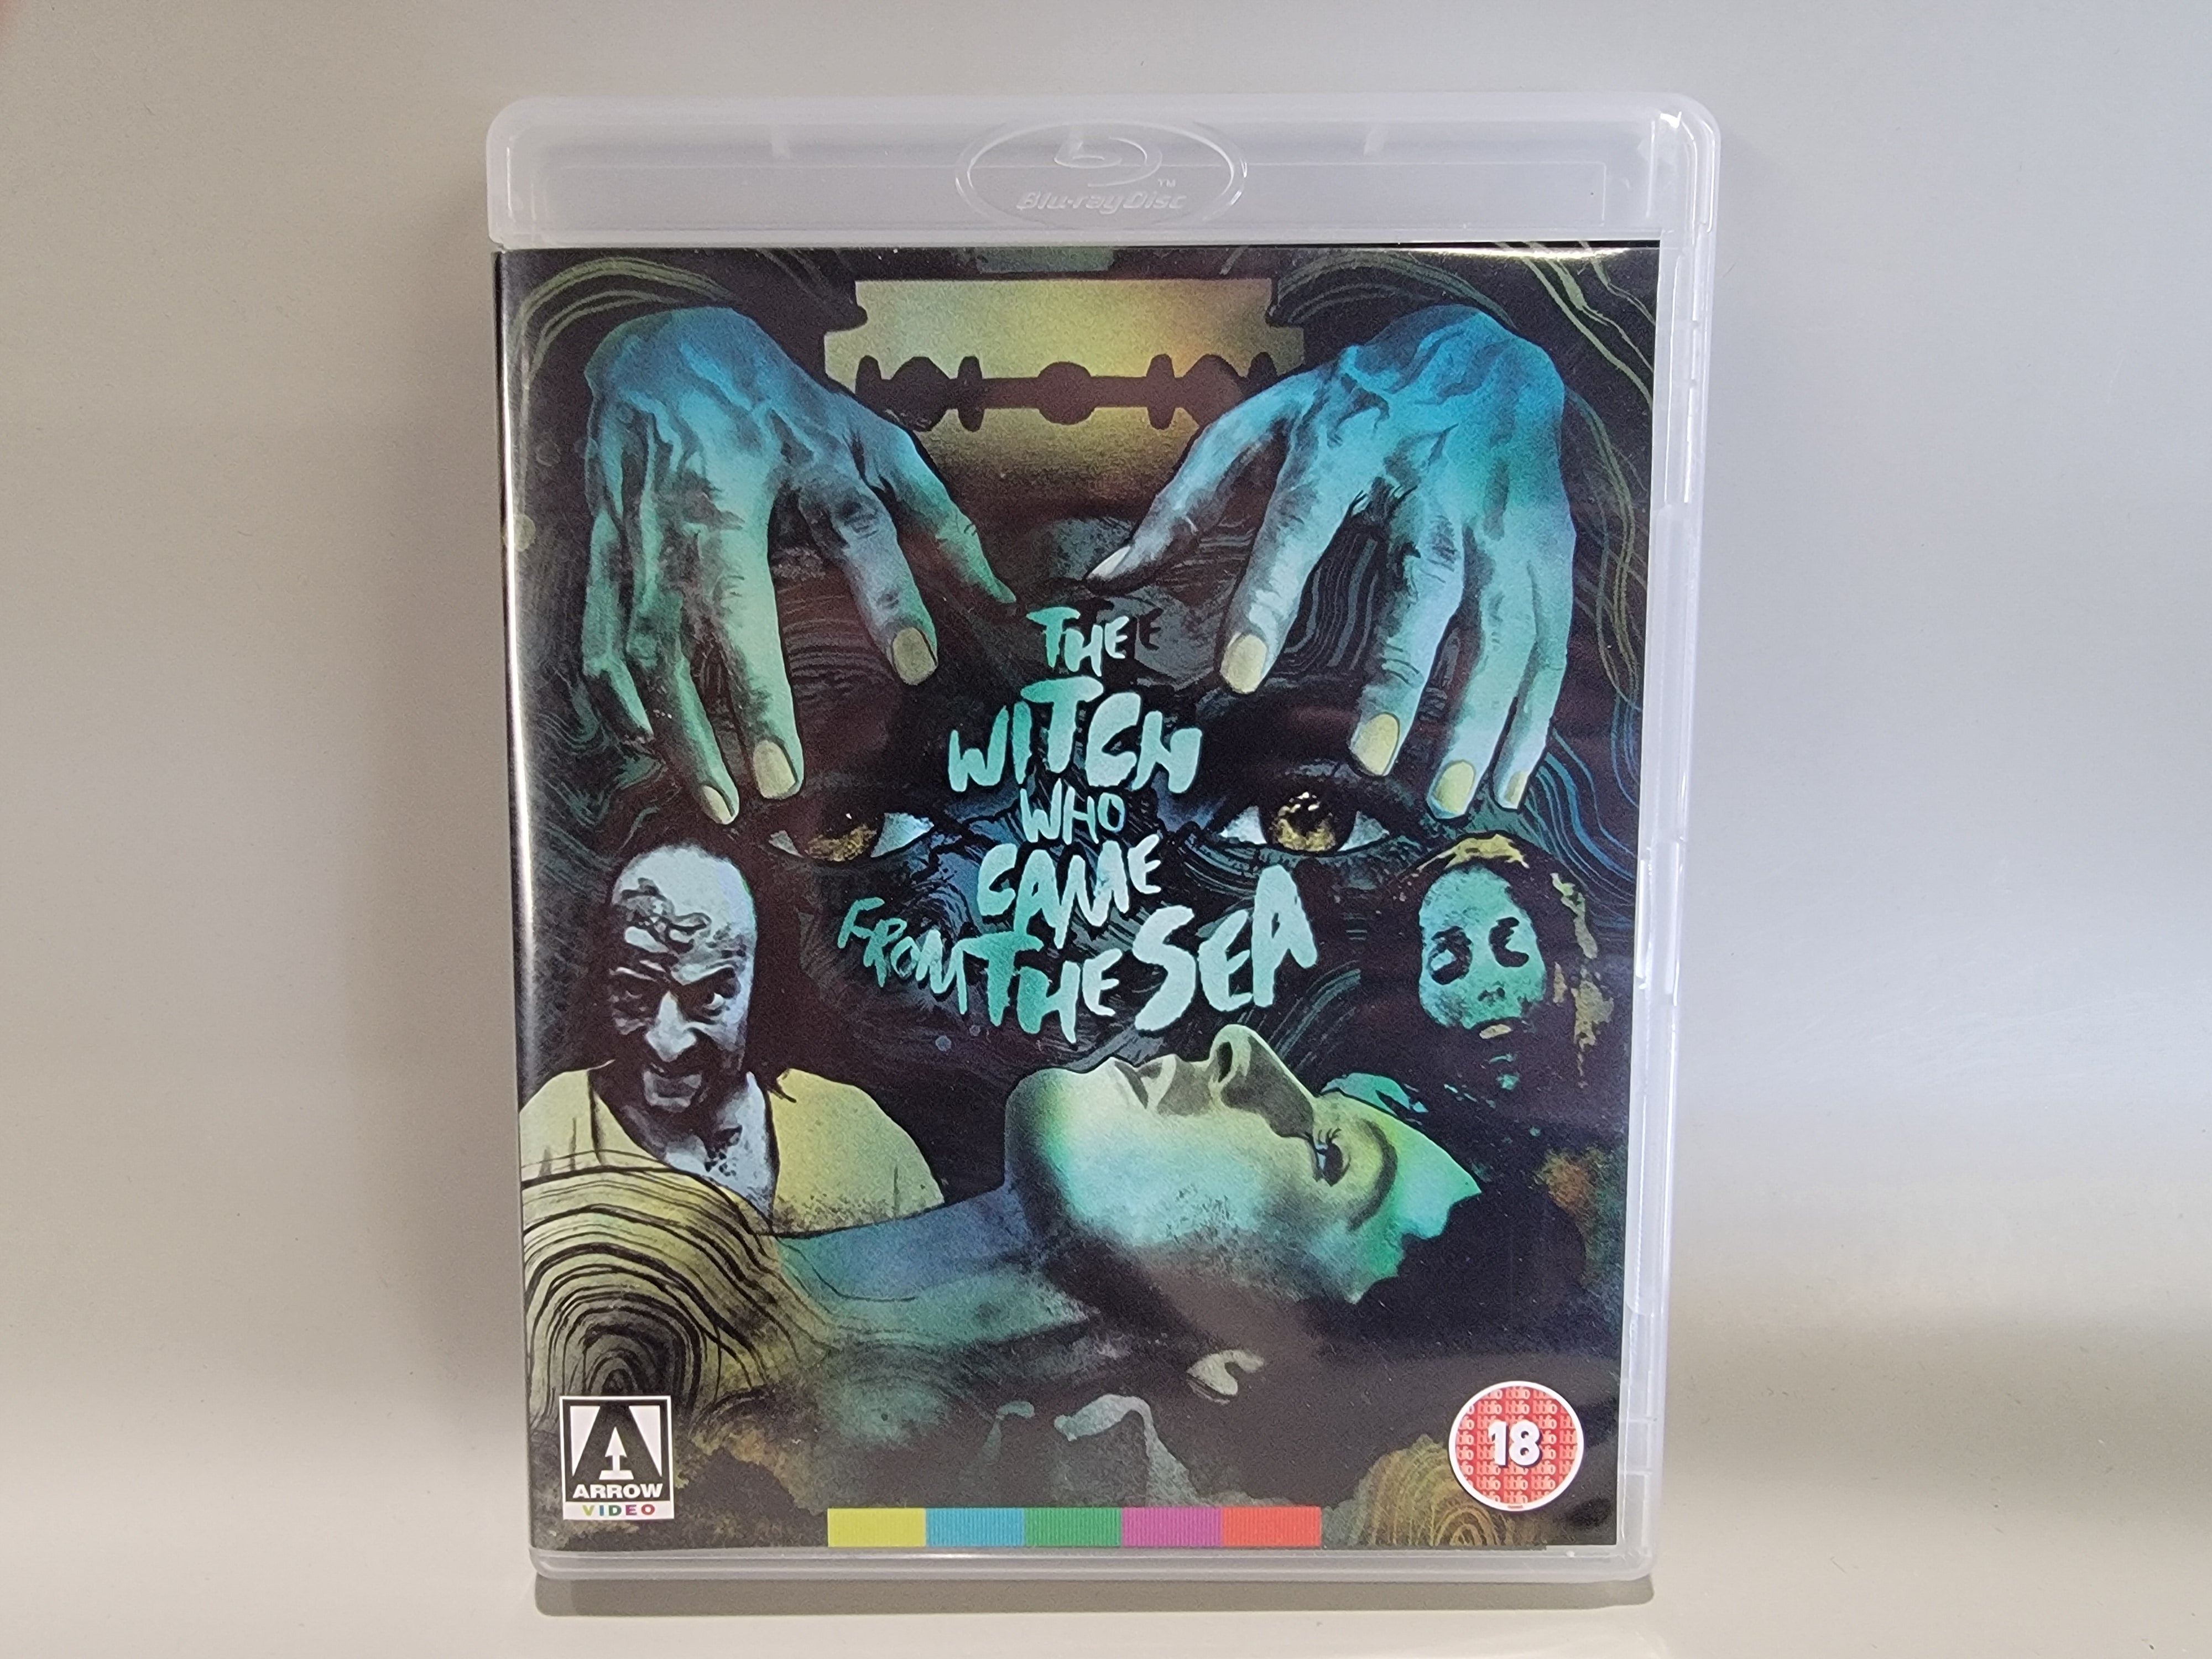 THE WITCH WHO CAME FROM THE SEA (REGION FREE IMPORT) BLU-RAY [USED]